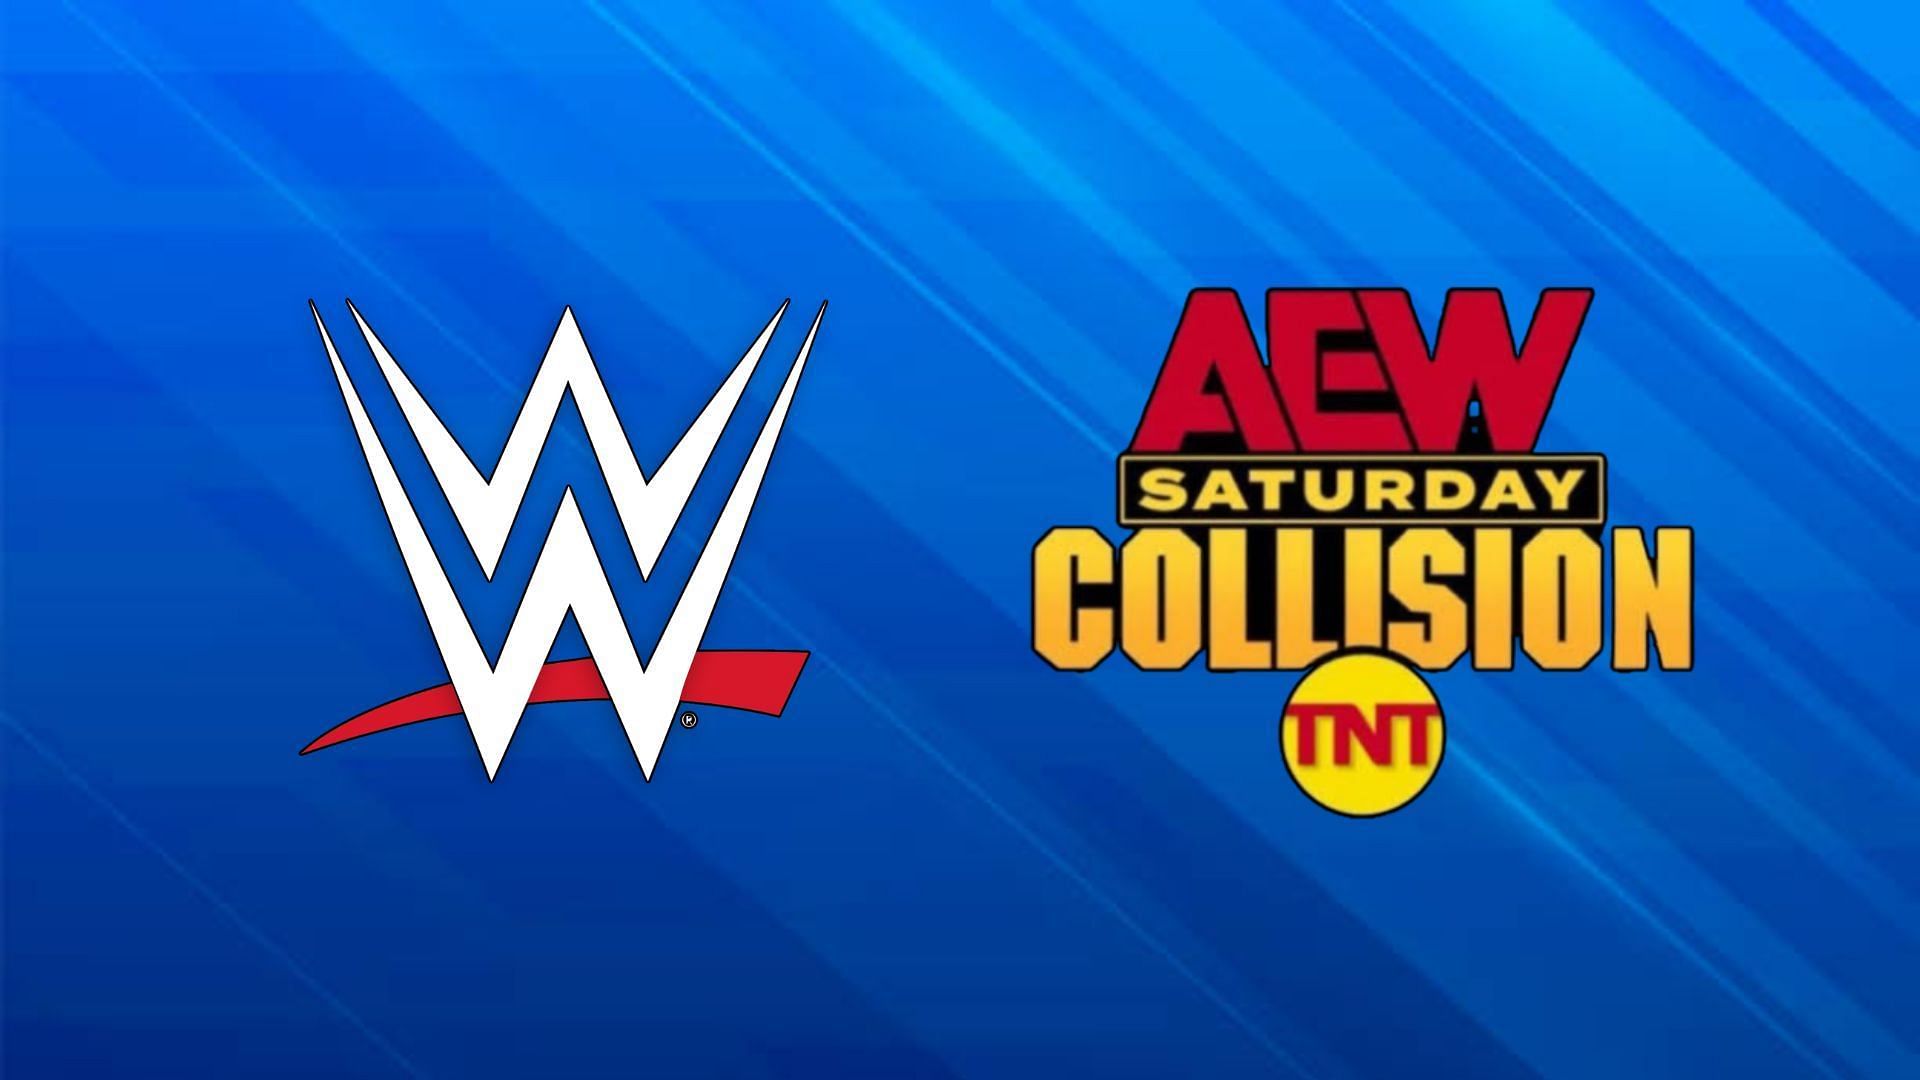 A former WWE star recently made their first appearance on AEW Collision.